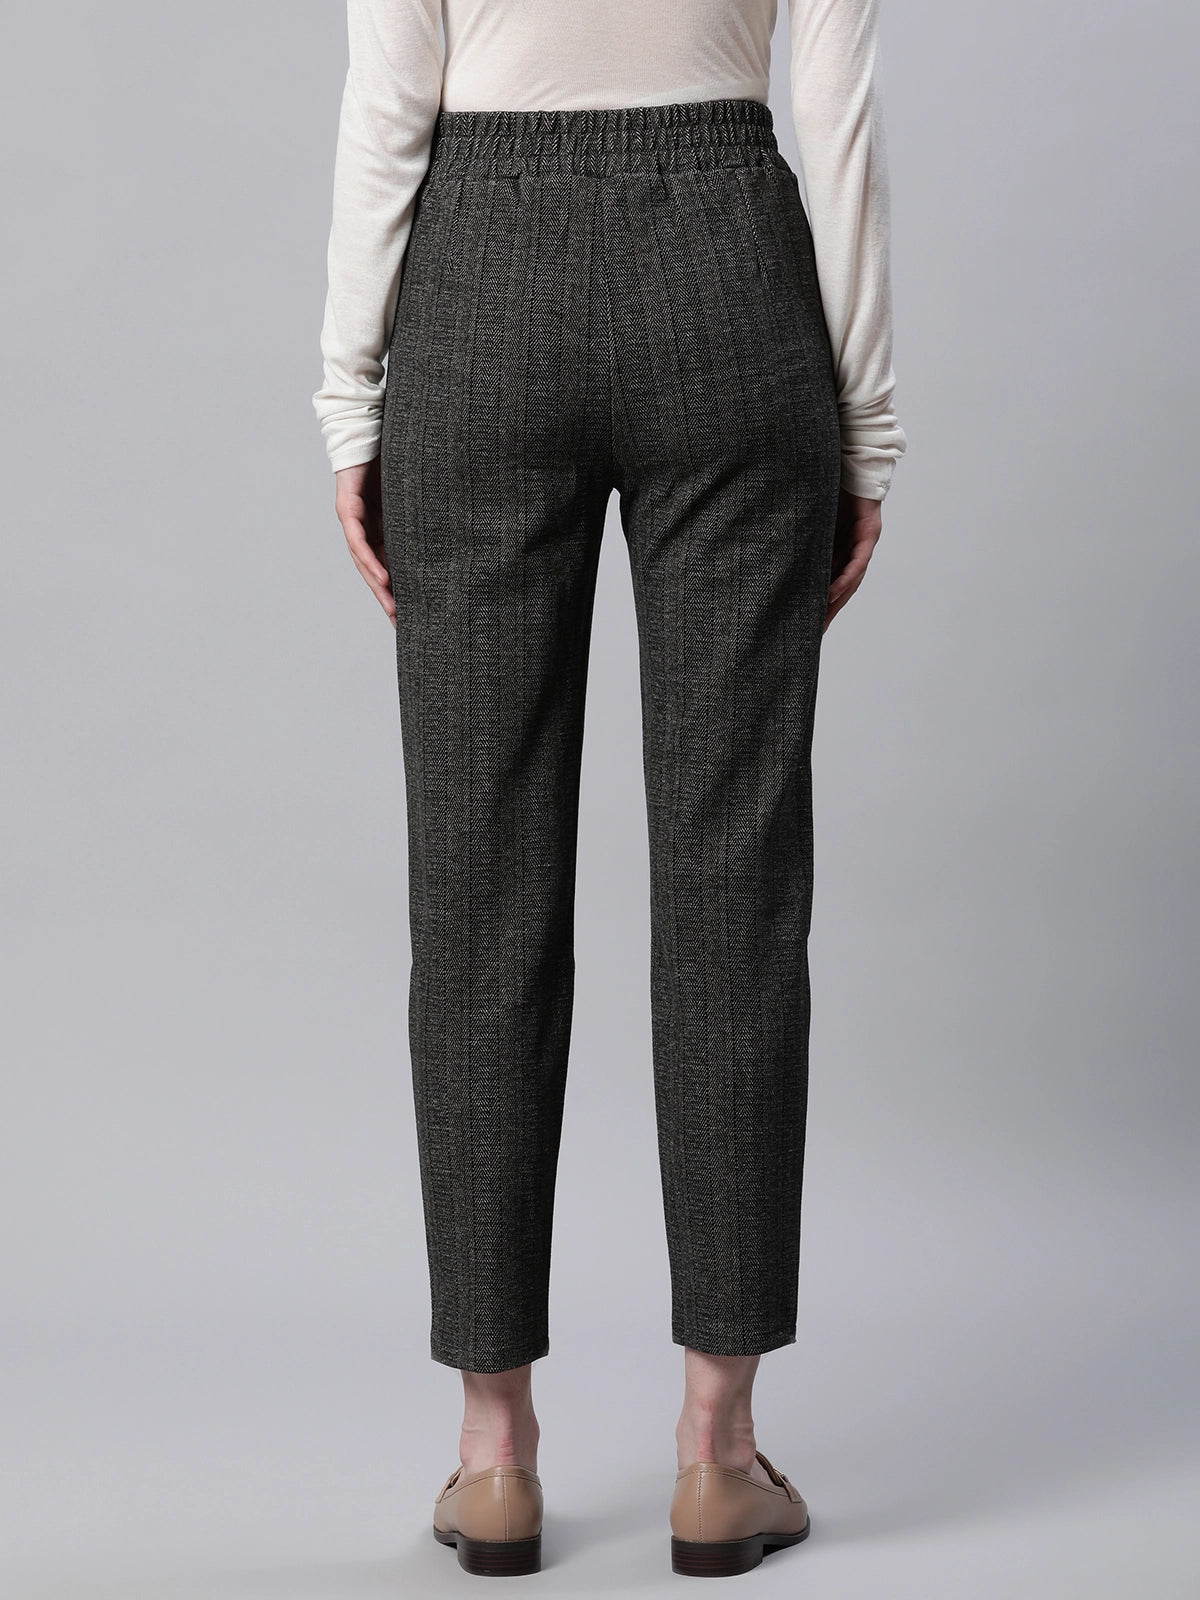 Second Life Marketplace - 20's Light Grey Tweed Trousers